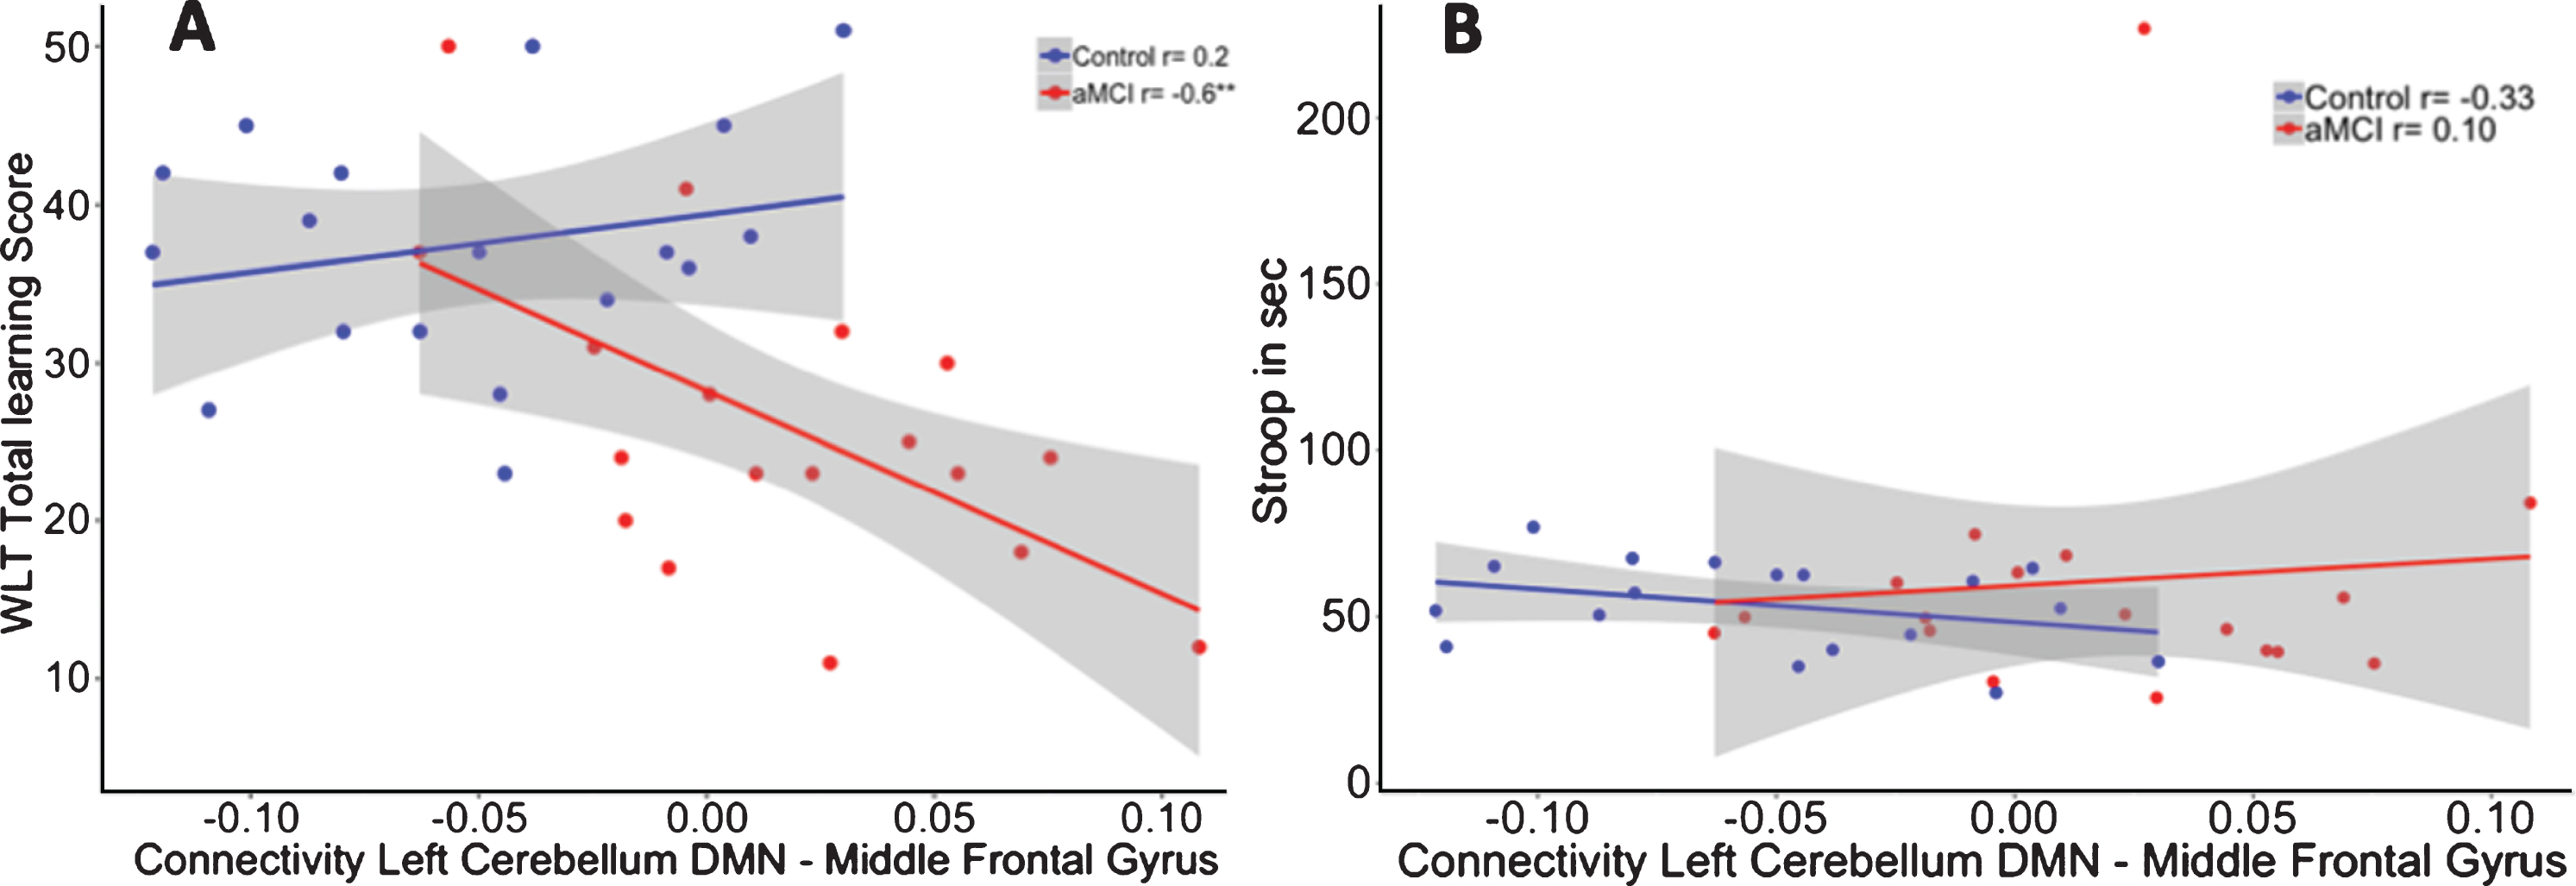 A) Correlation between functional connectivity between the left cerebellum DMN and Middle Frontal Gyrus and performance on the WLT total learning for healthy controls (blue) and aMCI patients (red). In the aMCI group, positive correlations between the cerebellar DMN and middle frontal gyrus were associated with worse memory performance. This association was not observed in the healthy controls. **p < 0.01. B) No association was found between functional connectivity between the left cerebellum DMN and middle frontal gyrus and performance on the Stroop total learning for healthy controls (blue) and aMCI patients (red).